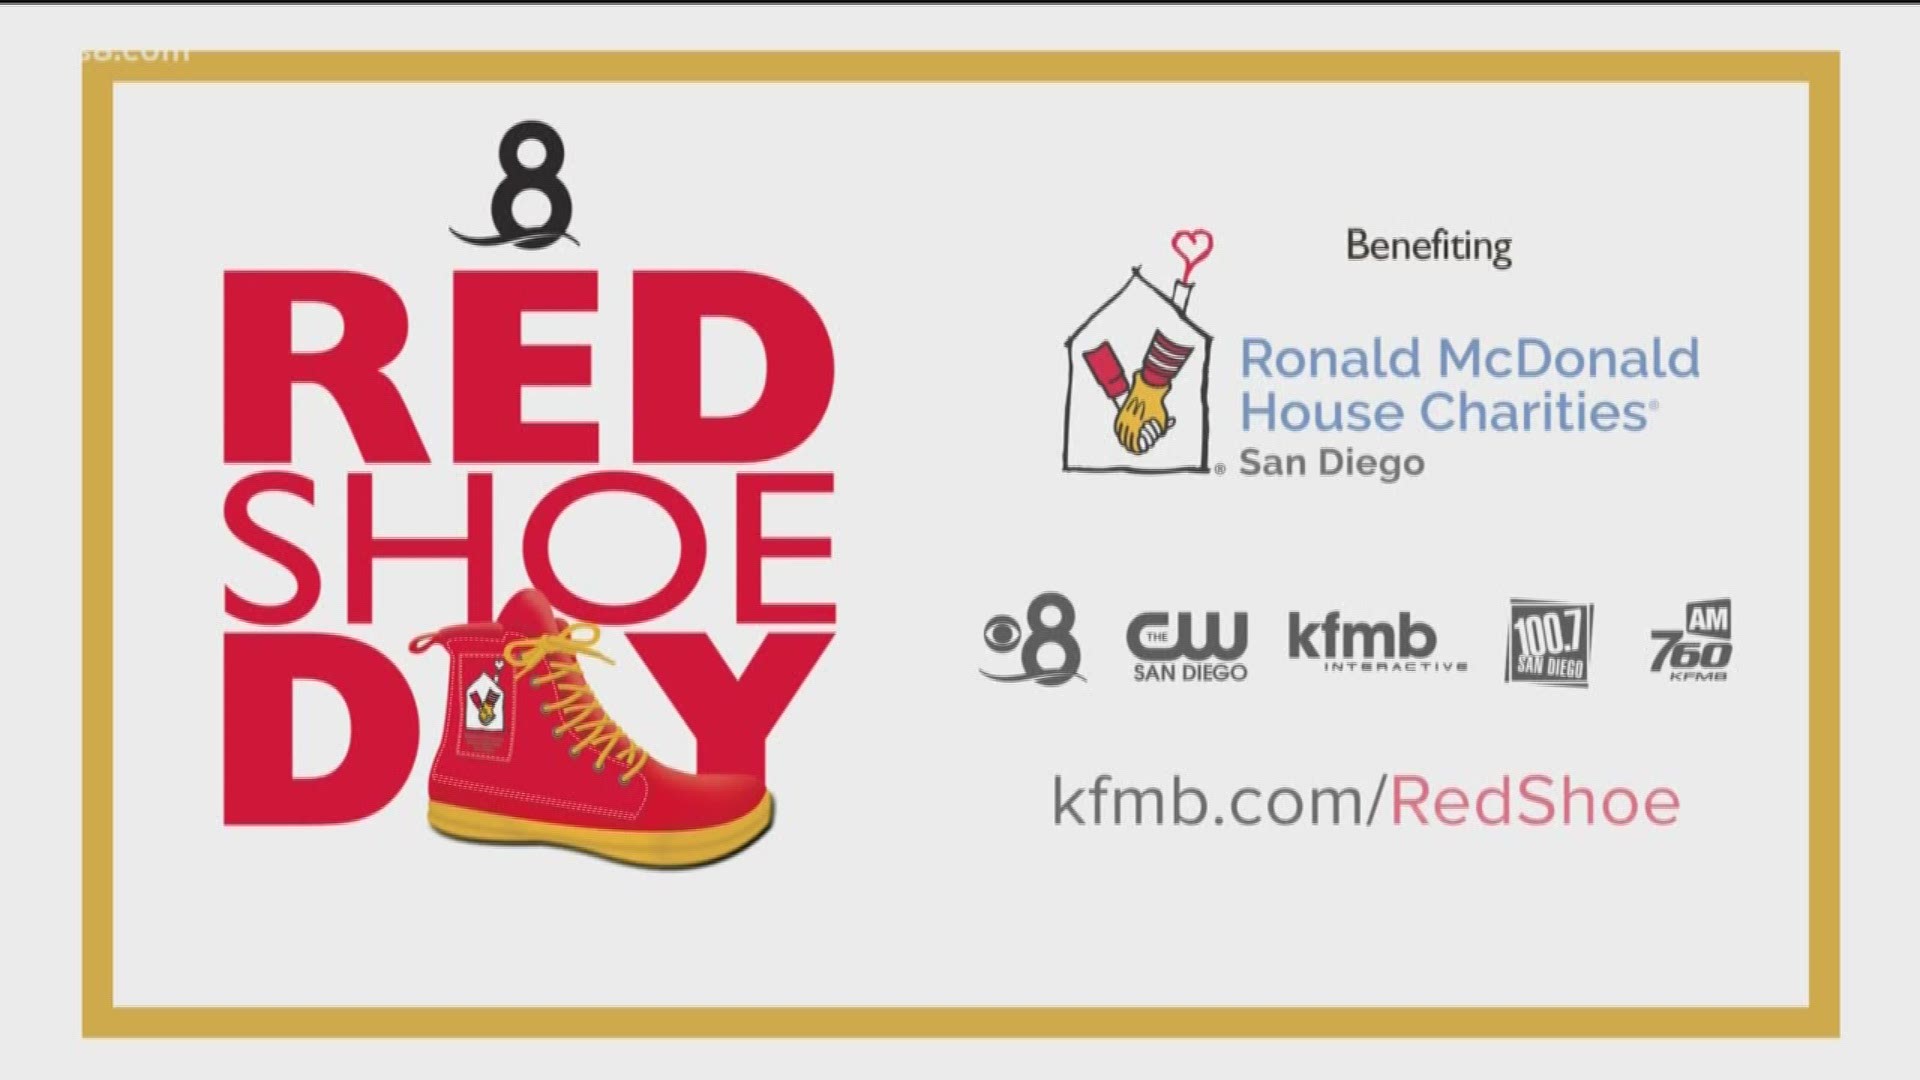 On Thursday morning, June 20, San Diego commuters will be seeing red. Red Shoe Day is a fundraiser that benefits Ronald McDonald House Charities of San Diego.